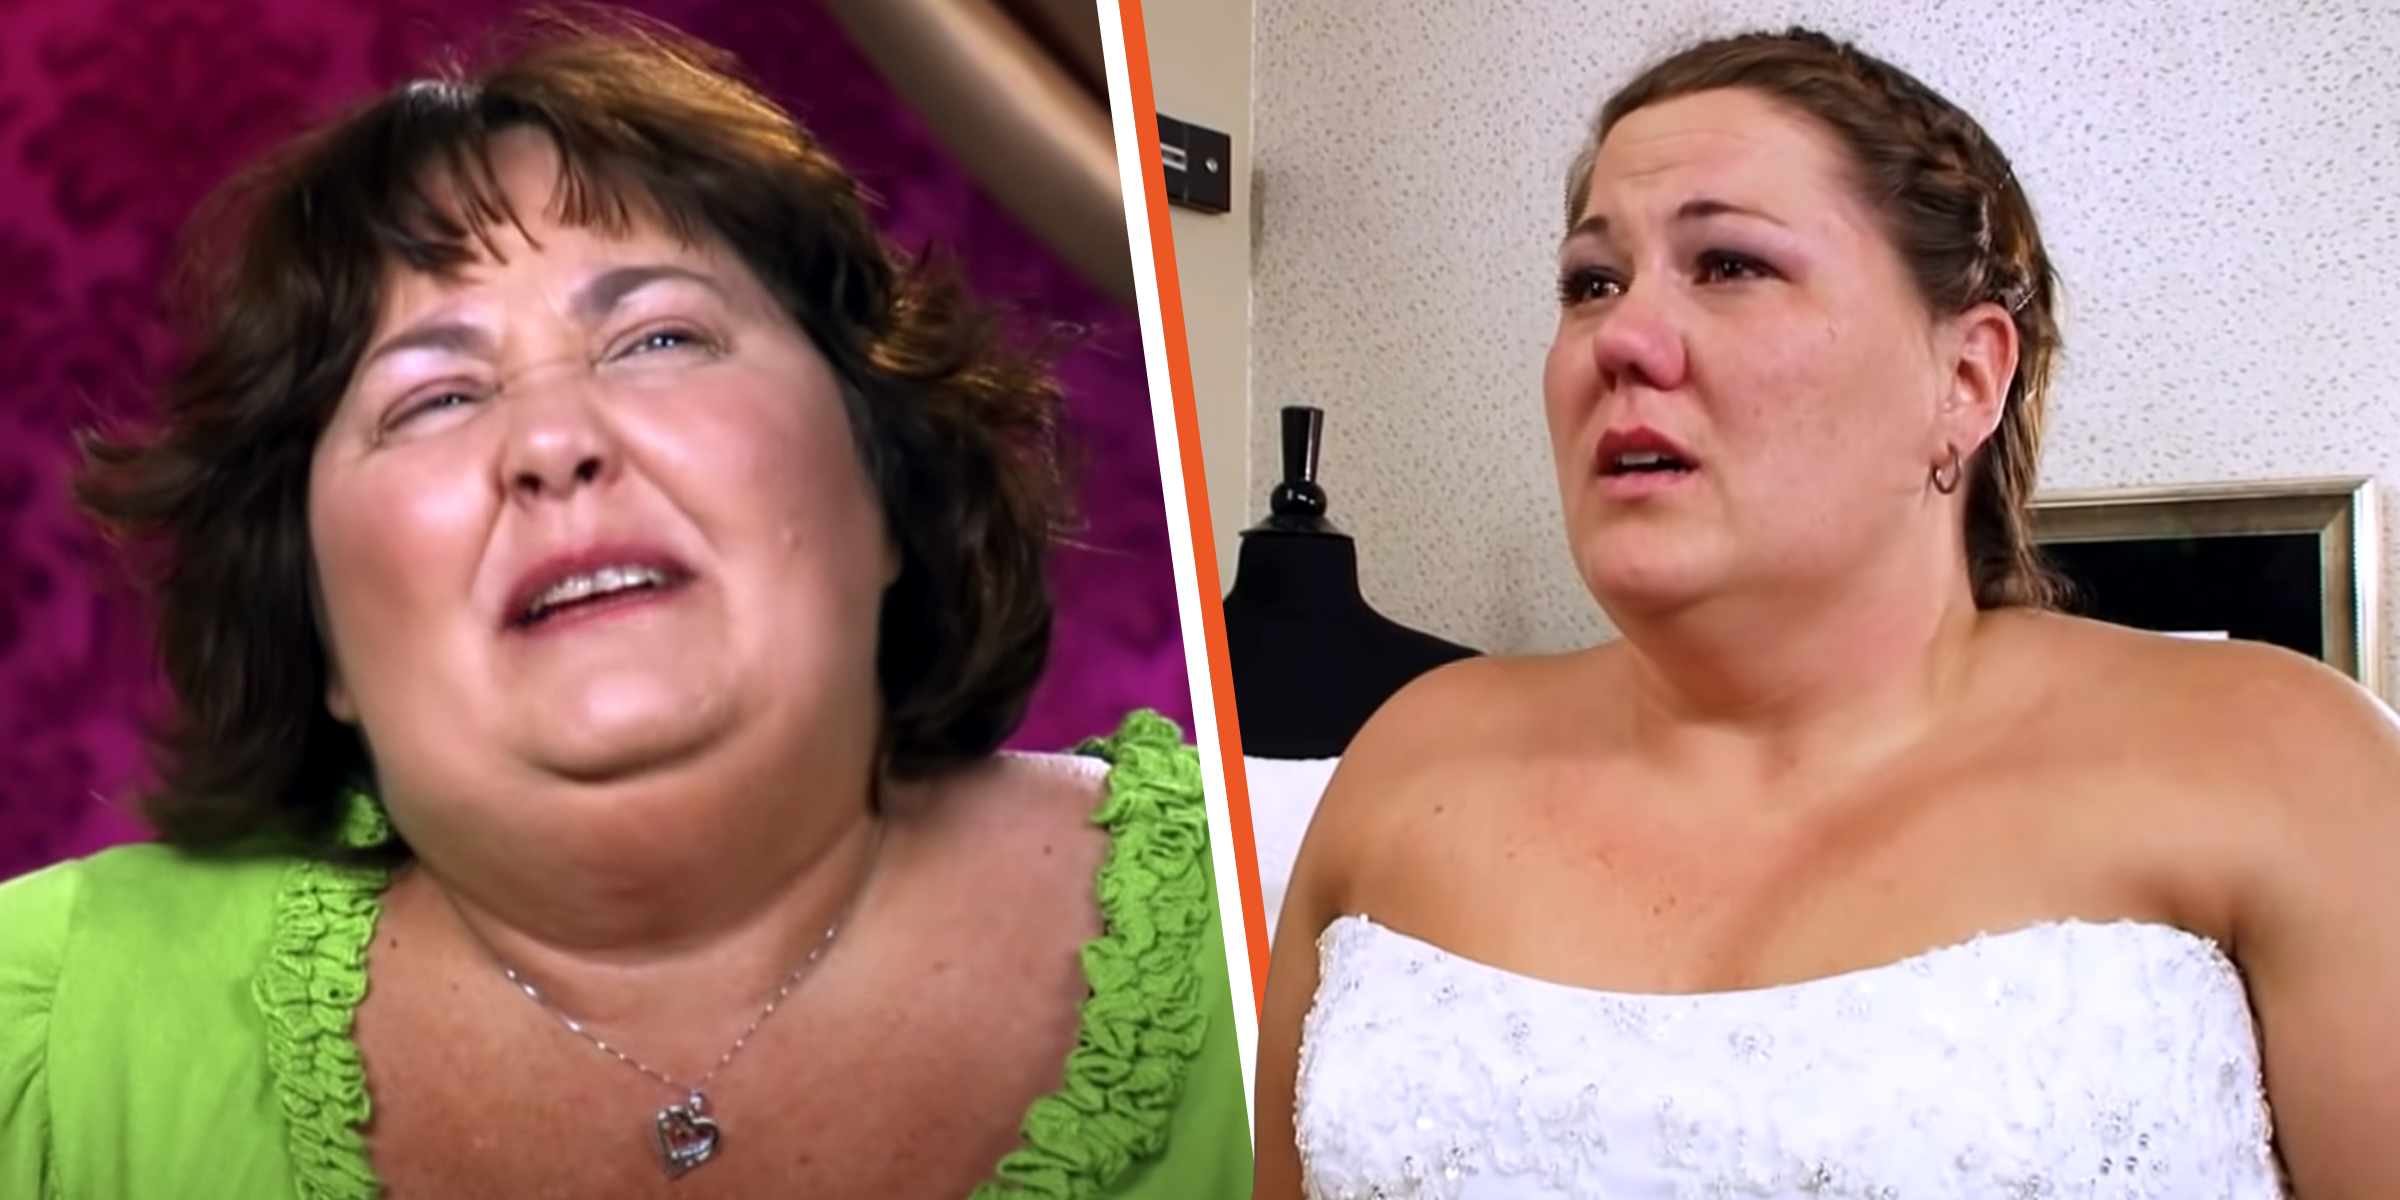 Mom Sees Her Bride Daughter in Wedding Dress, Starts Laughing at Her